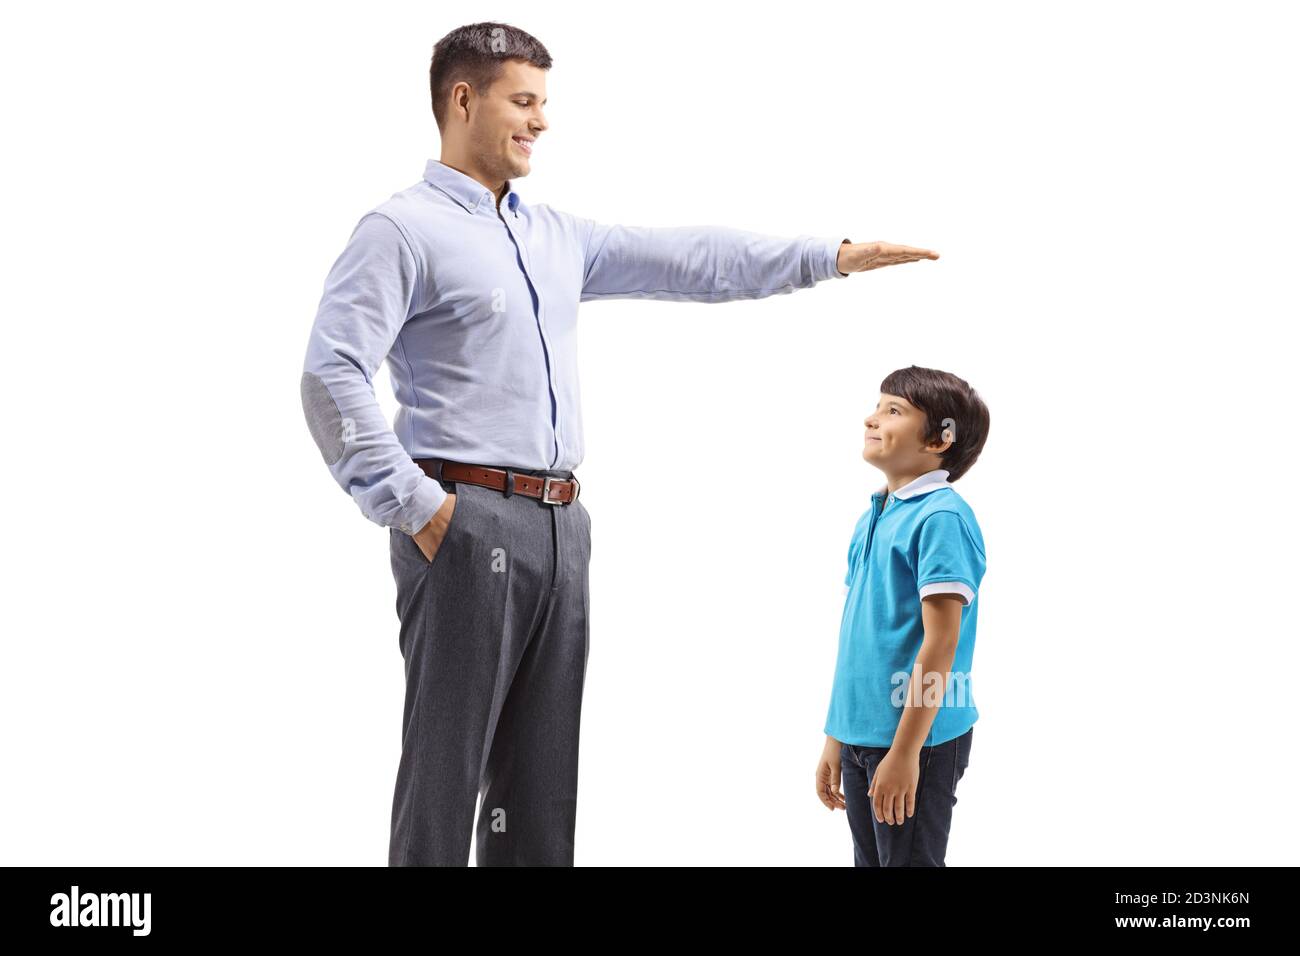 Man measuring the height of a boy isolated on white background Stock Photo